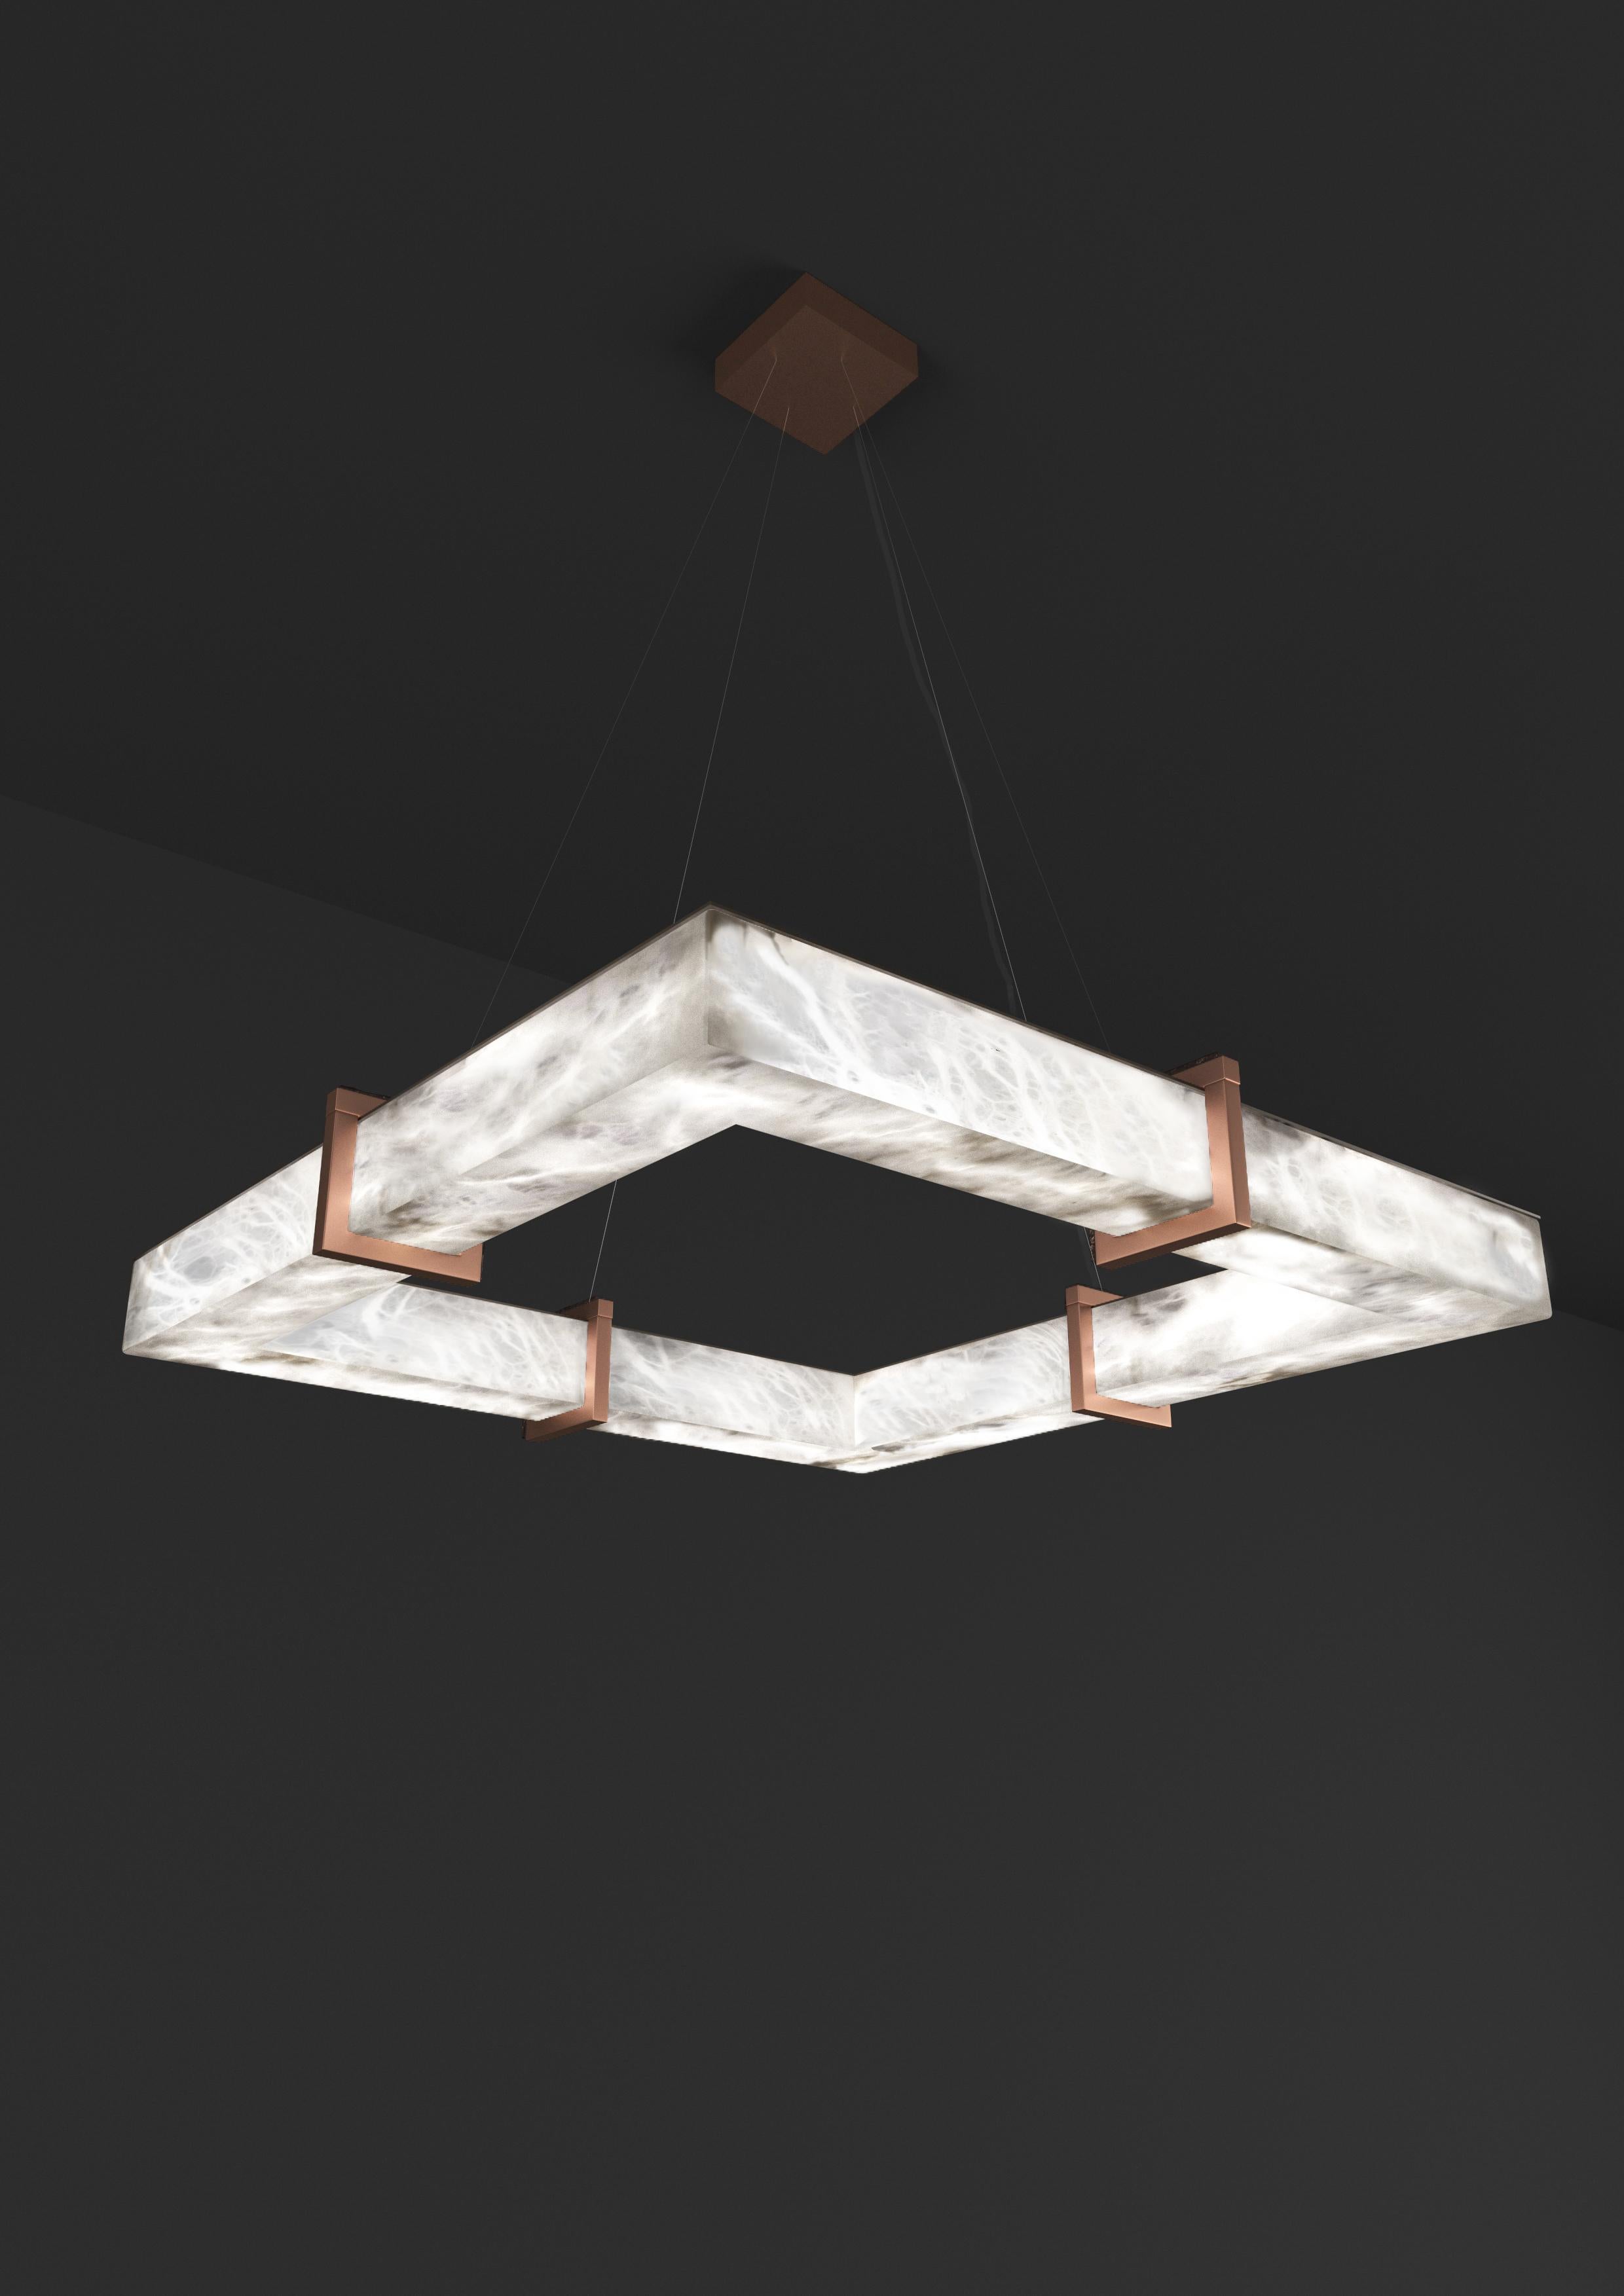 Talassa Copper Pendant Lamp by Alabastro Italiano
Dimensions: D 80 x W 80 x H 11 cm.
Materials: White alabaster and copper.

Available in different finishes: Shiny Silver, Bronze, Brushed Brass, Ruggine of Florence, Brushed Burnished, Shiny Gold,